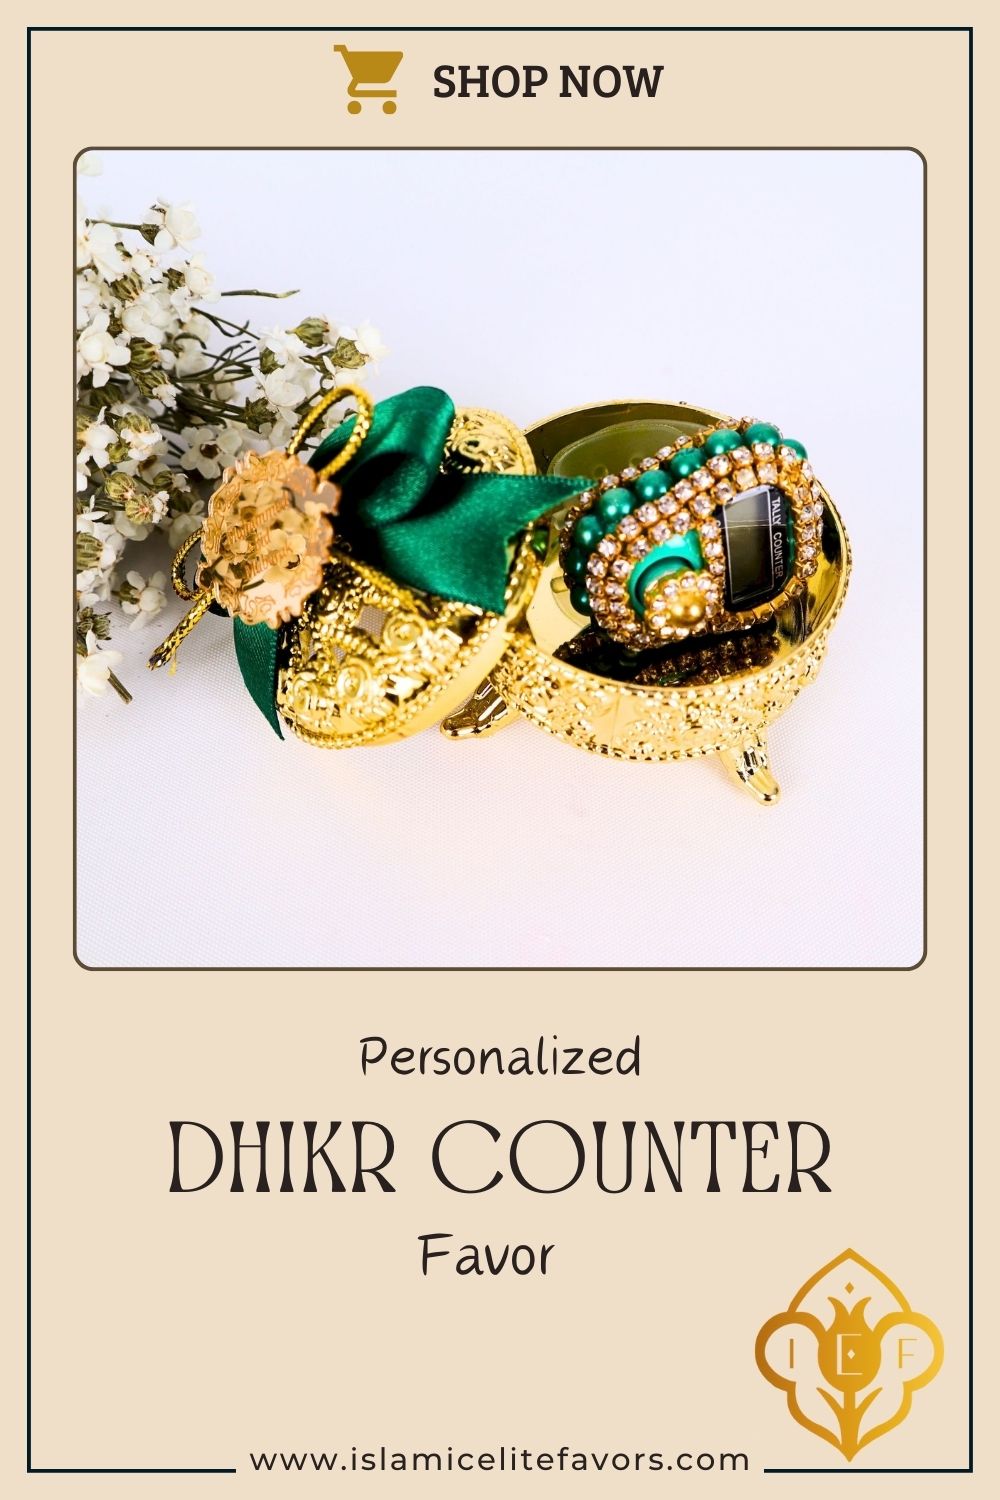 Personalized Dhikr Counter Ramadan Eid Favor Islam Muslim Wedding Gift - Islamic Elite Favors is a handmade gift shop offering a wide variety of unique and personalized gifts for all occasions. Whether you're looking for the perfect Ramadan, Eid, Hajj, wedding gift or something special for a birthday, baby shower or anniversary, we have something for everyone. High quality, made with love.